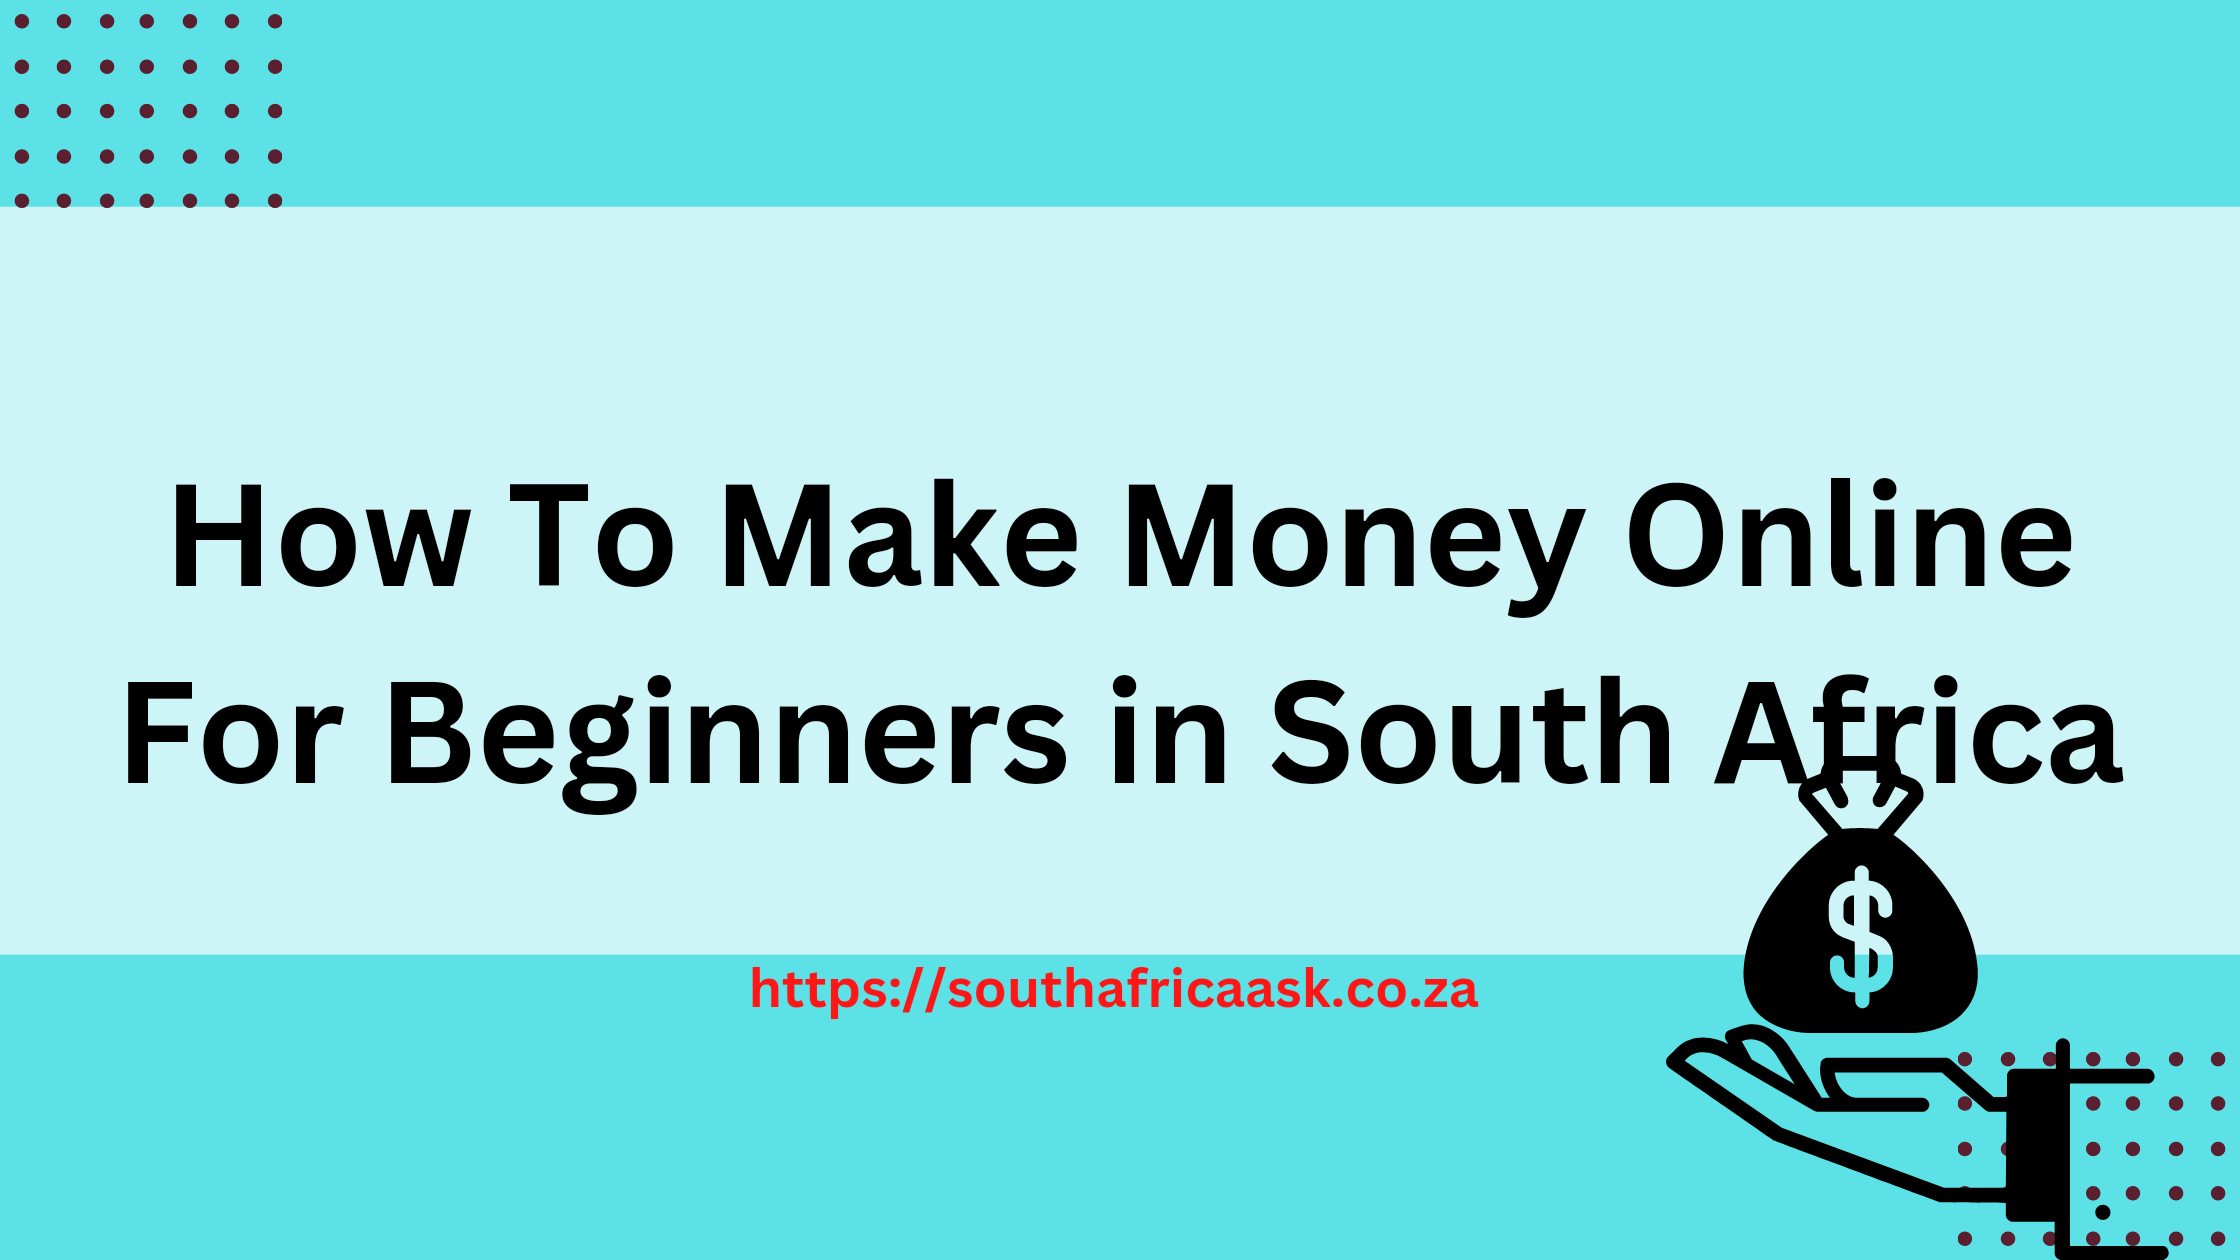 How To Make Money Online For Beginners in South Africa